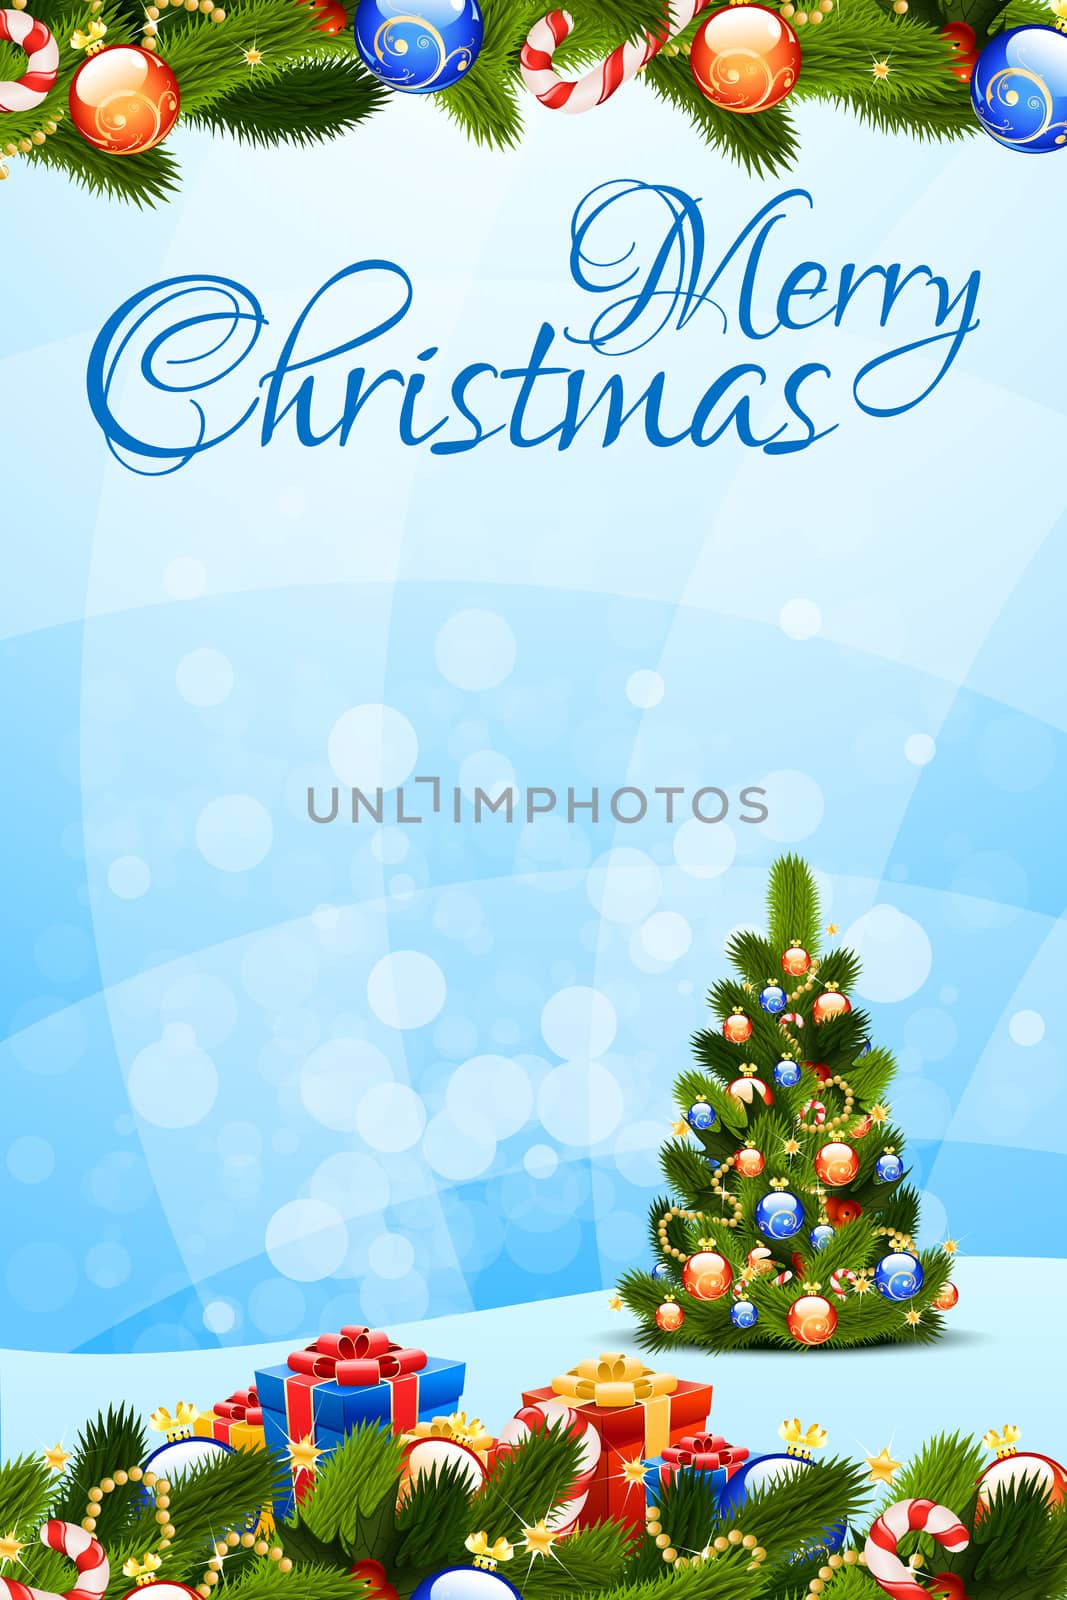 Merry Christmas Greeting Card with Christmas Tree and Decorations